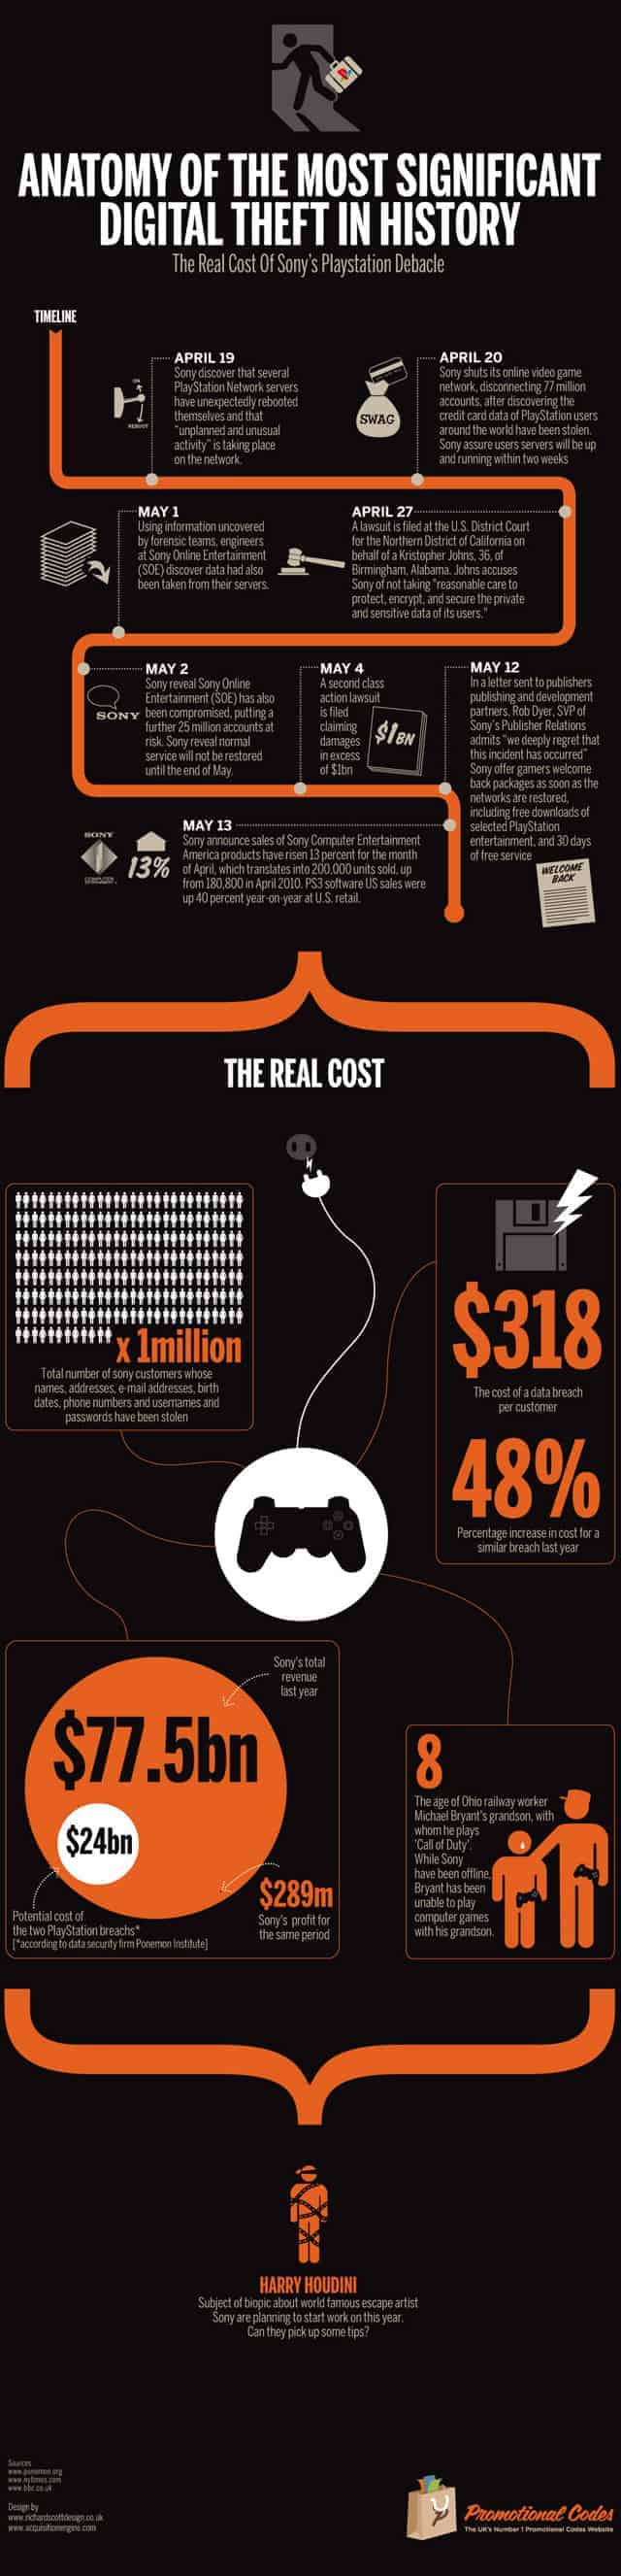 Real Cost of the Sony's Playstation Debacle